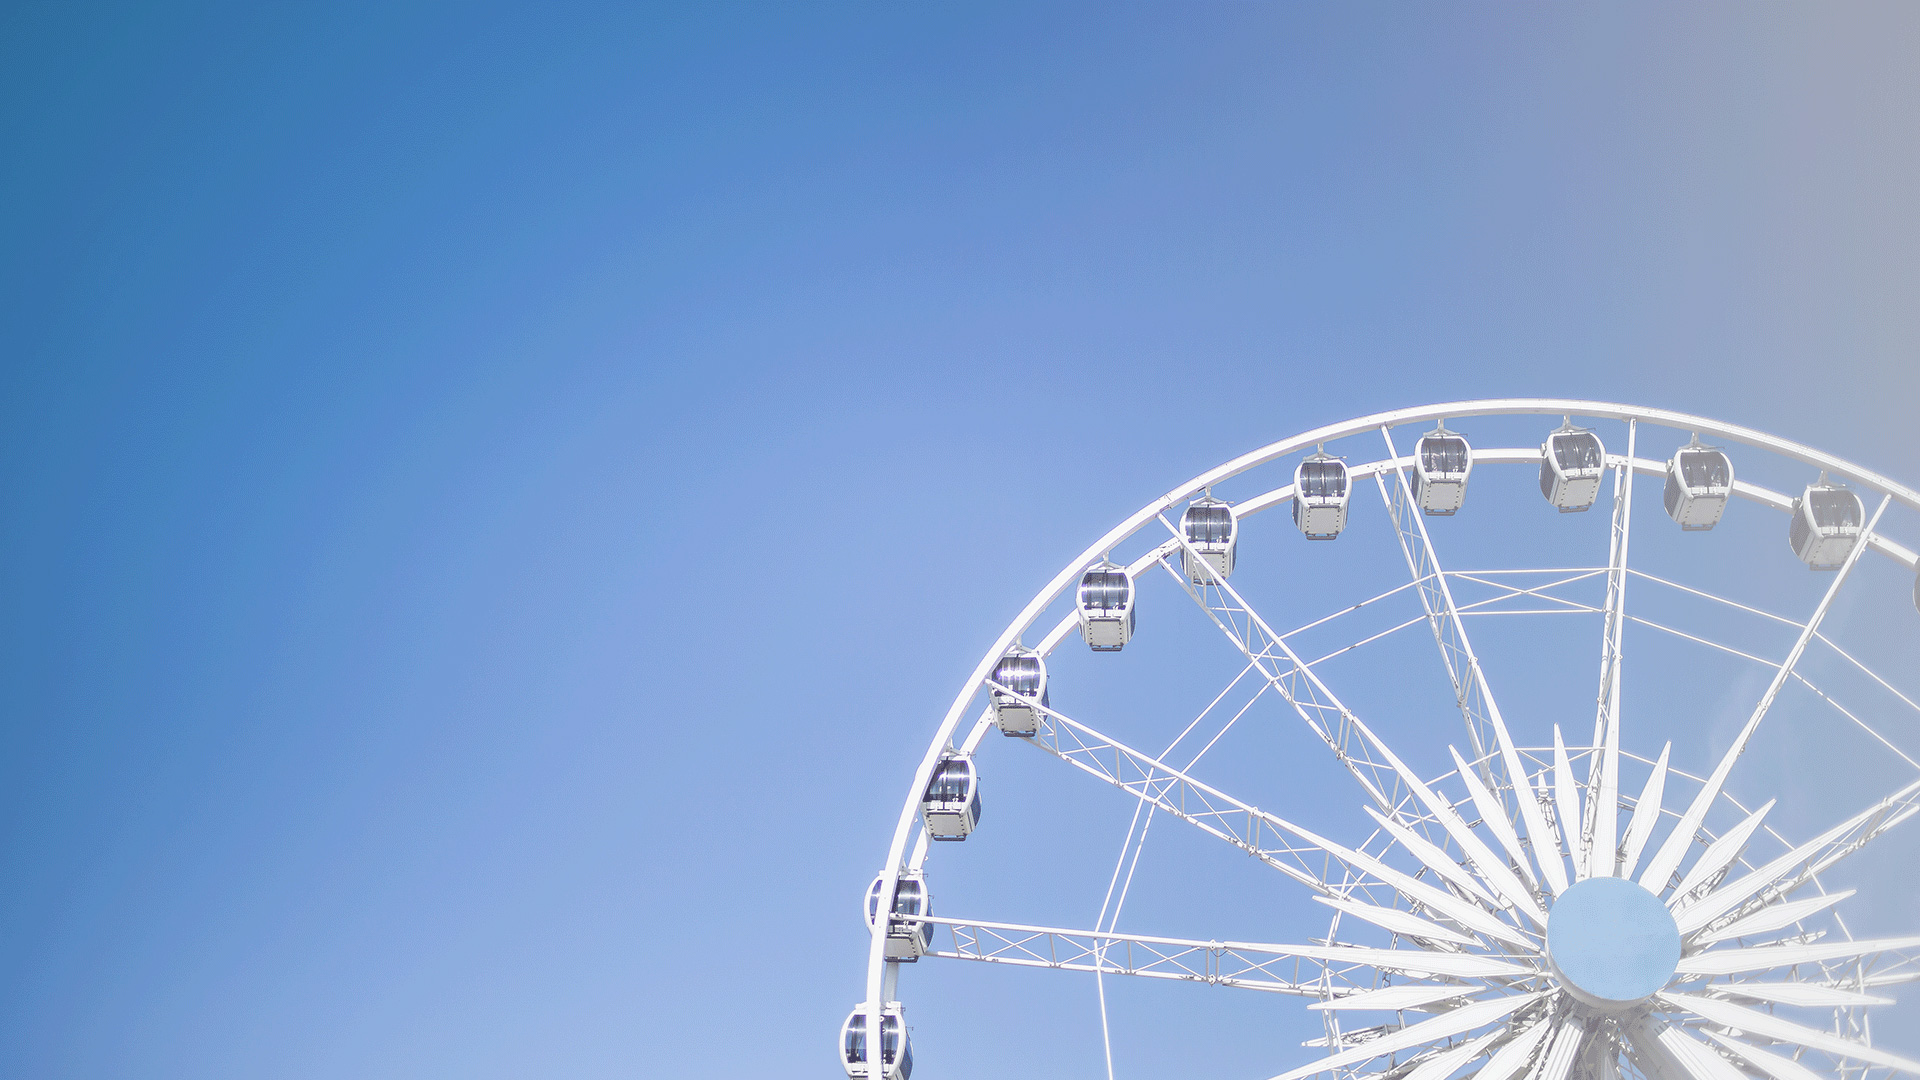 White ferris wheel in front of clear blue skies